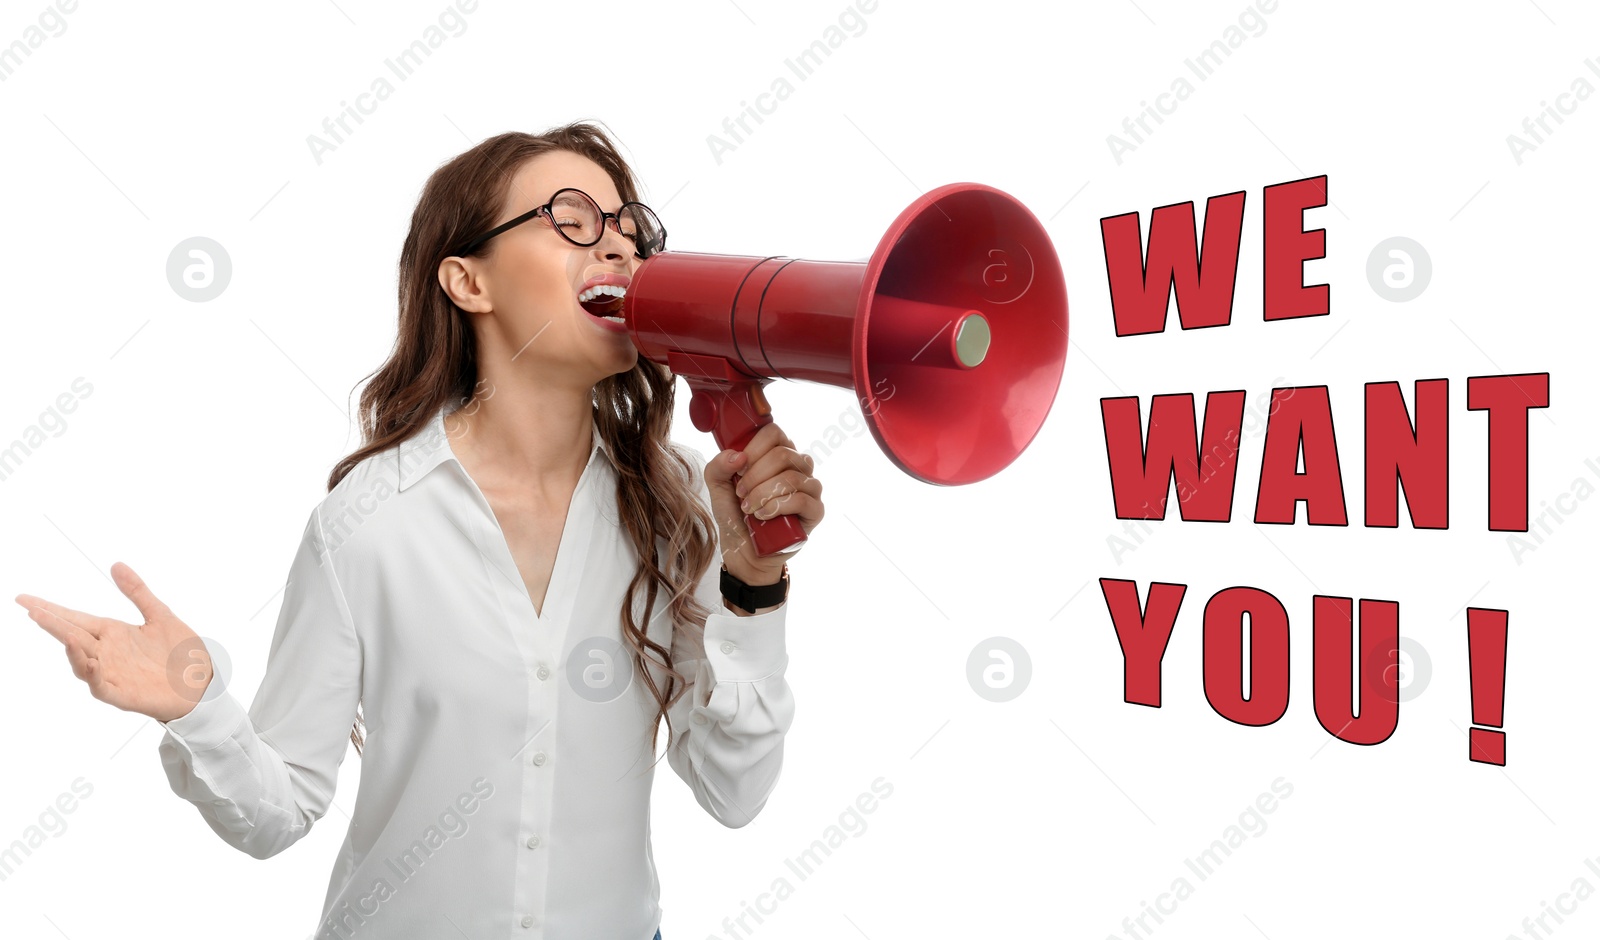 Image of Young woman with megaphone and phrase WE WANT YOU on white background. Career promotion